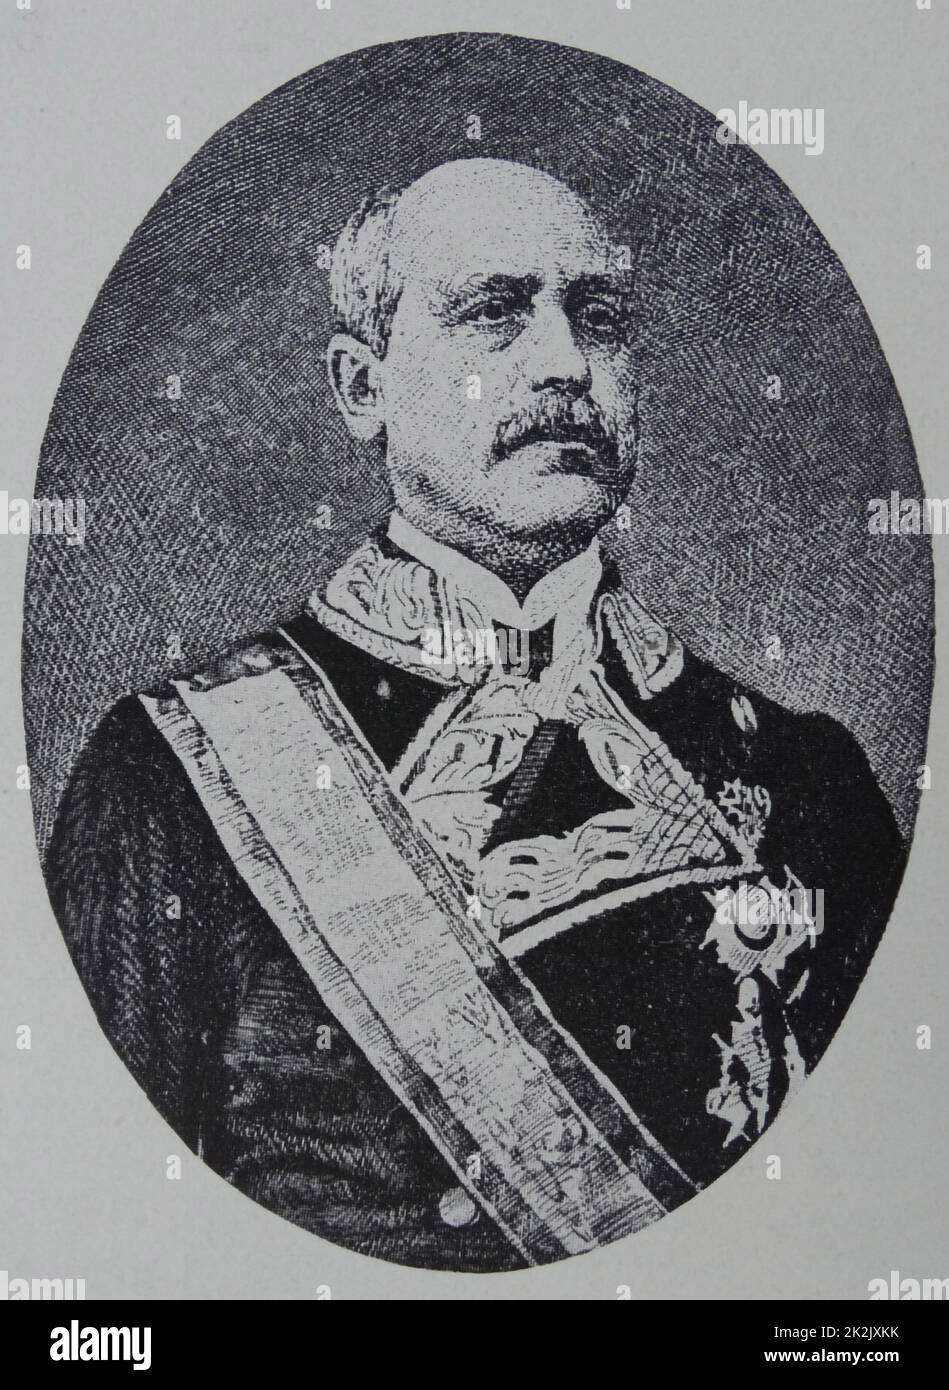 Francisco Serrano Domínguez Cuenca y Pérez de Vargas, 1st Duke of la Torre Grandee of Spain, Count of San Antonio (es: Francisco Serrano y Domínguez, primer duque de la Torre, conde de San Antonio; 17 December 1810 ñ 25 November 1885) was a Spanish marshal and statesman. He was Prime Minister of Spain and regent in 1868-1869. Stock Photo